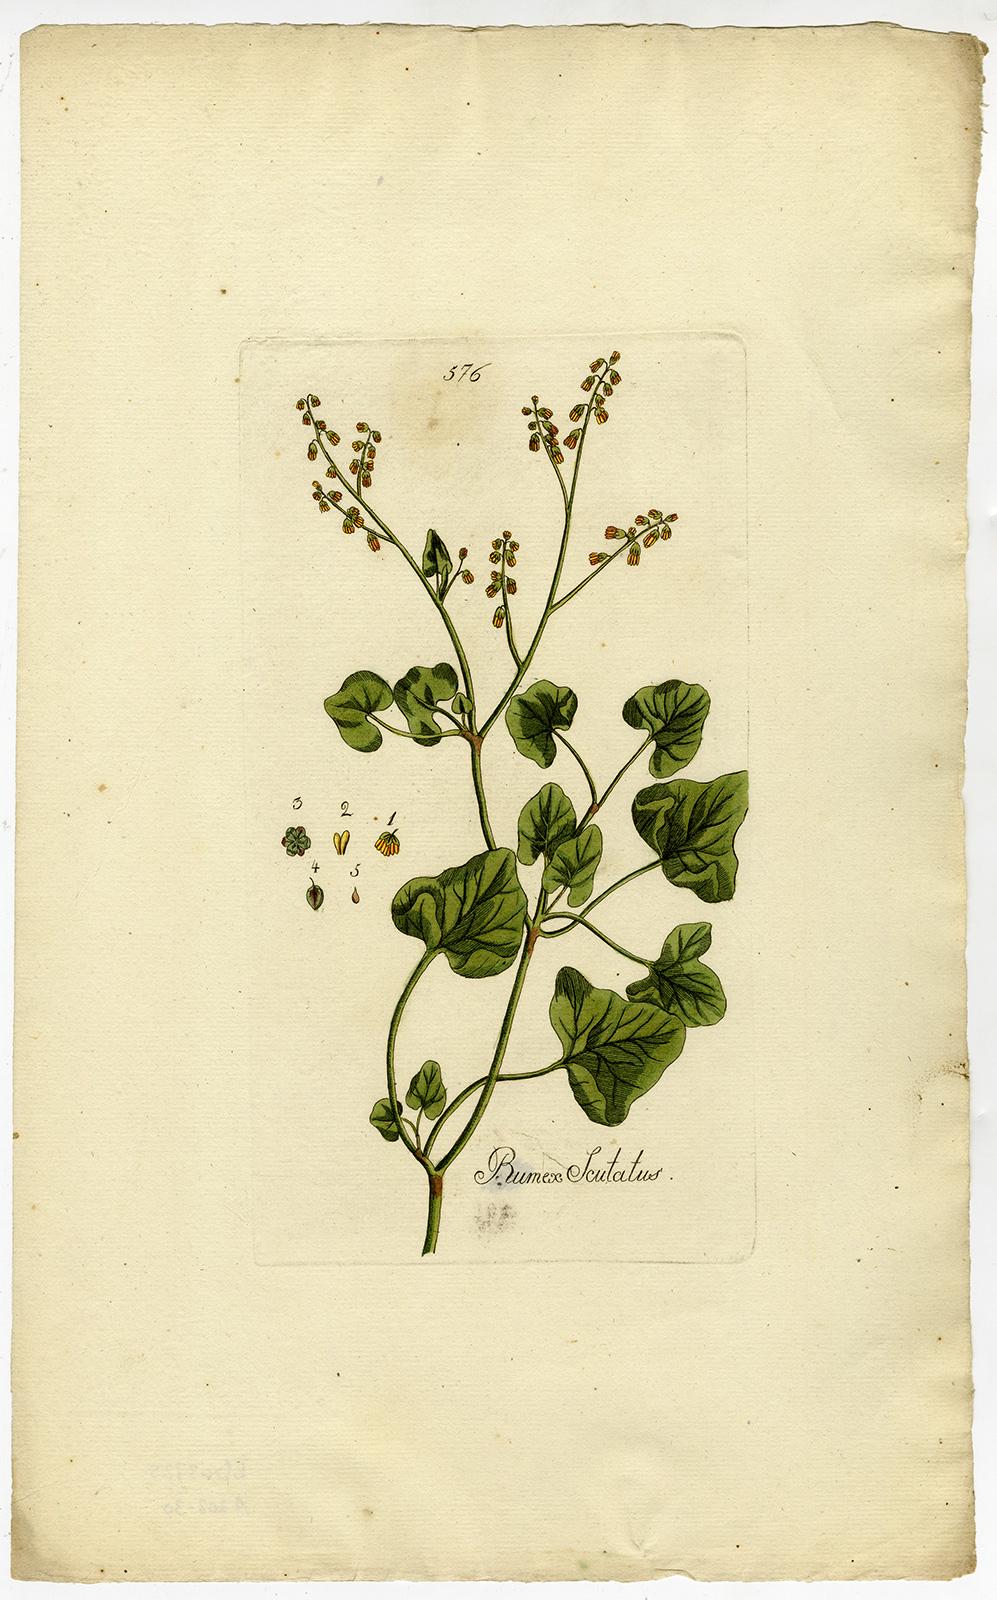 French Sorrel from Medicinal Plants by Happe - Handcoloured engraving - 18th c. - Print by Andreas Friedrich Happe